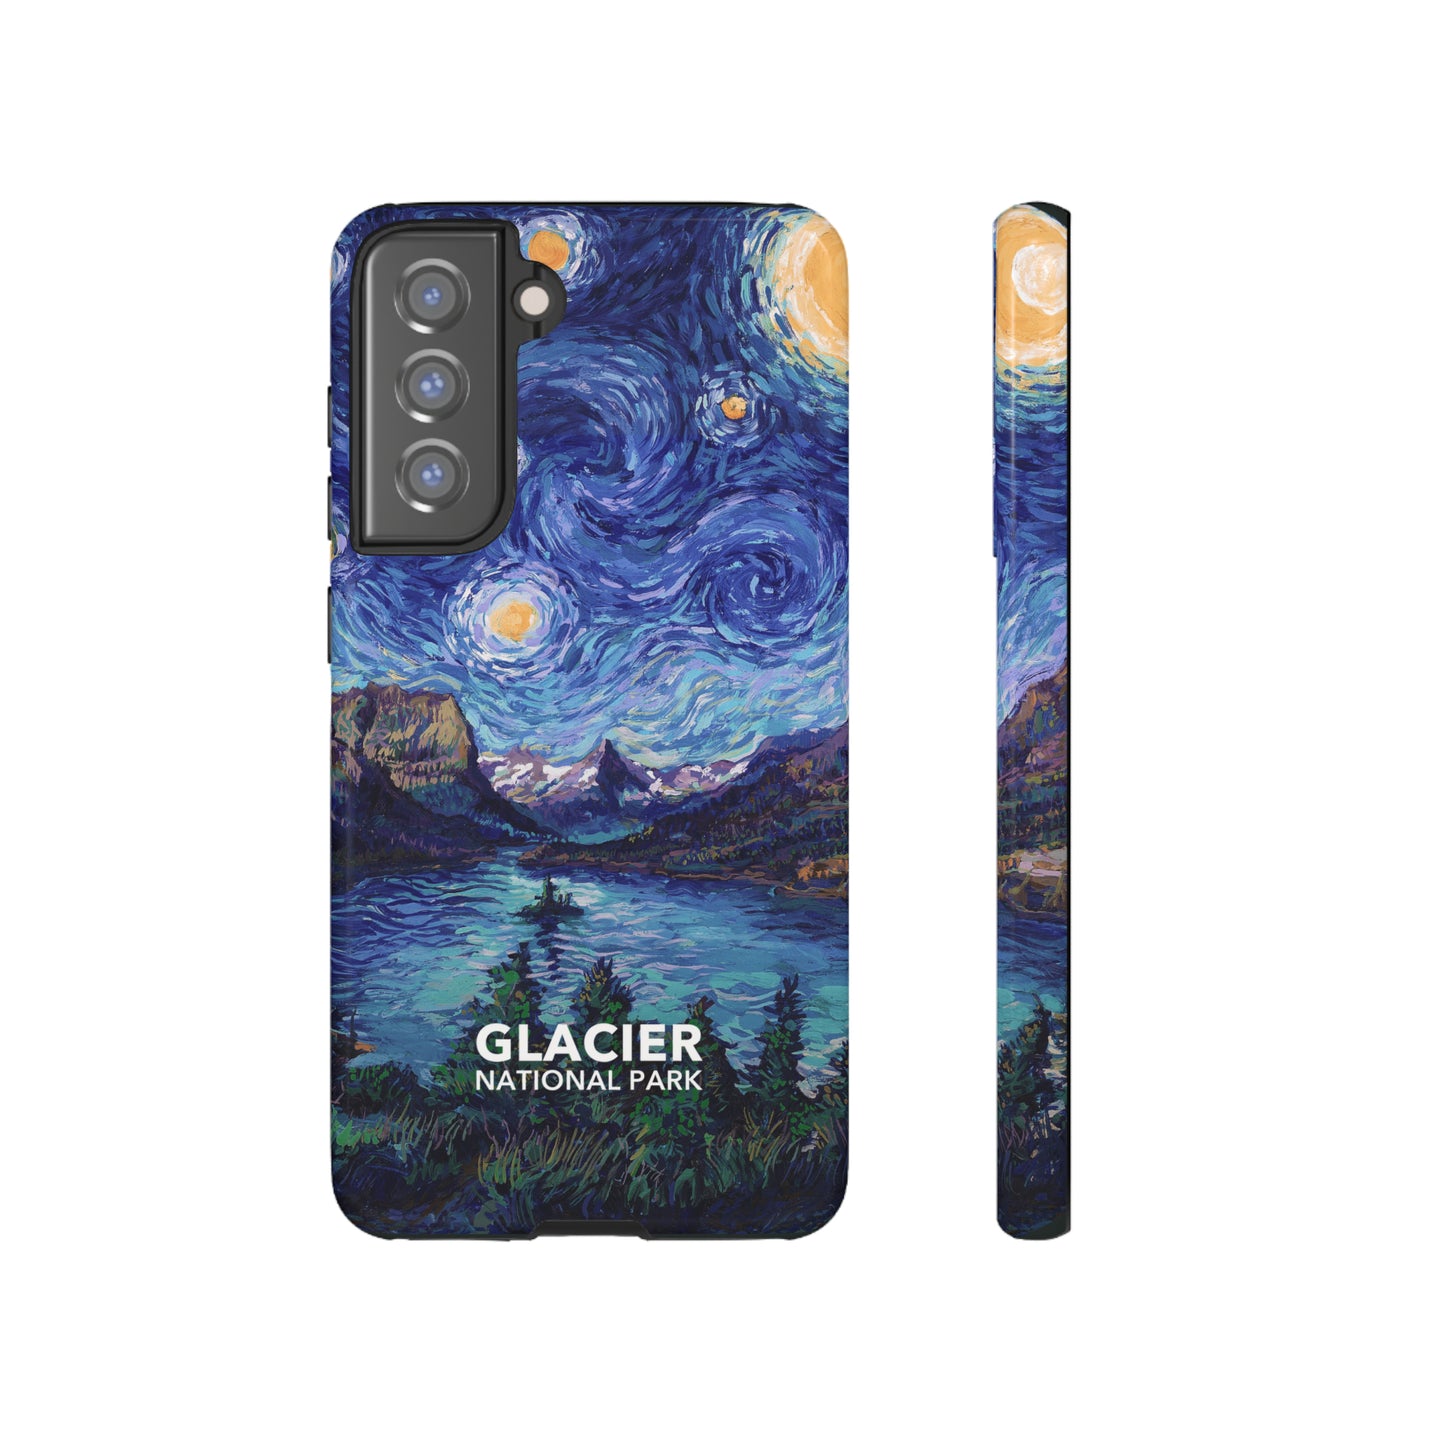 Copy of Rocky Mountain National Park Phone Case